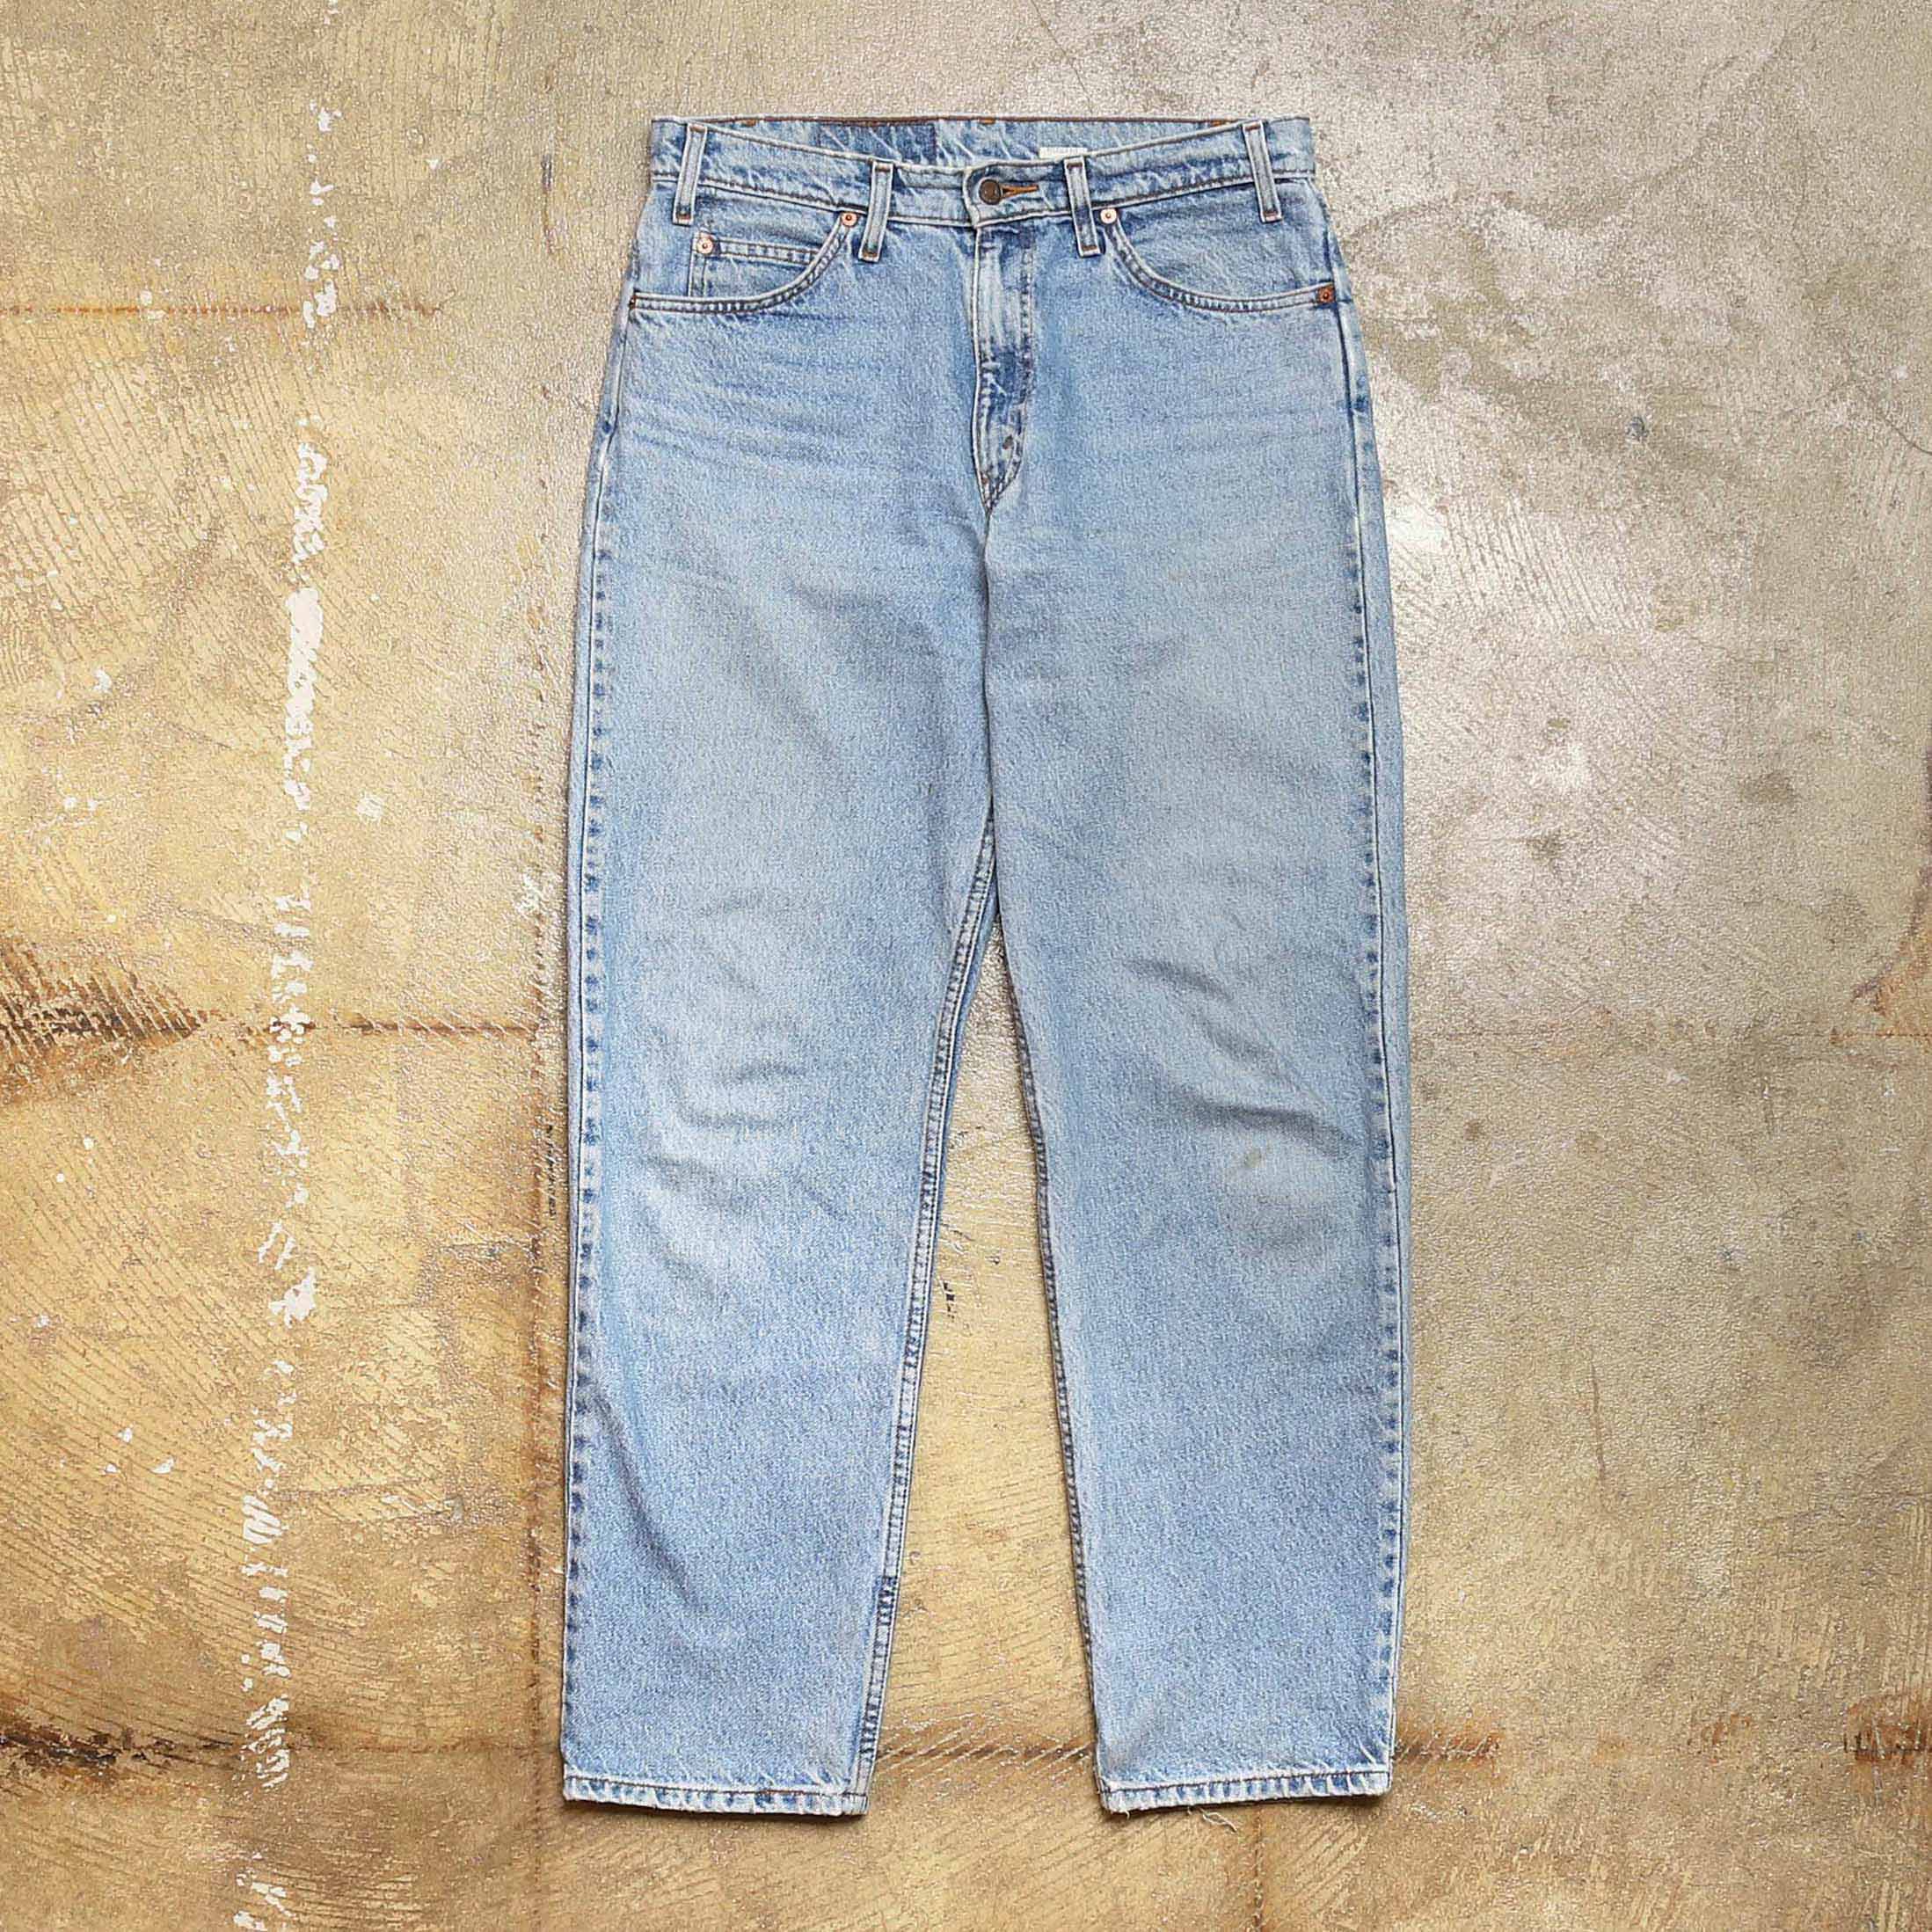 LEVIS 550 RELAXED FIT DENIM